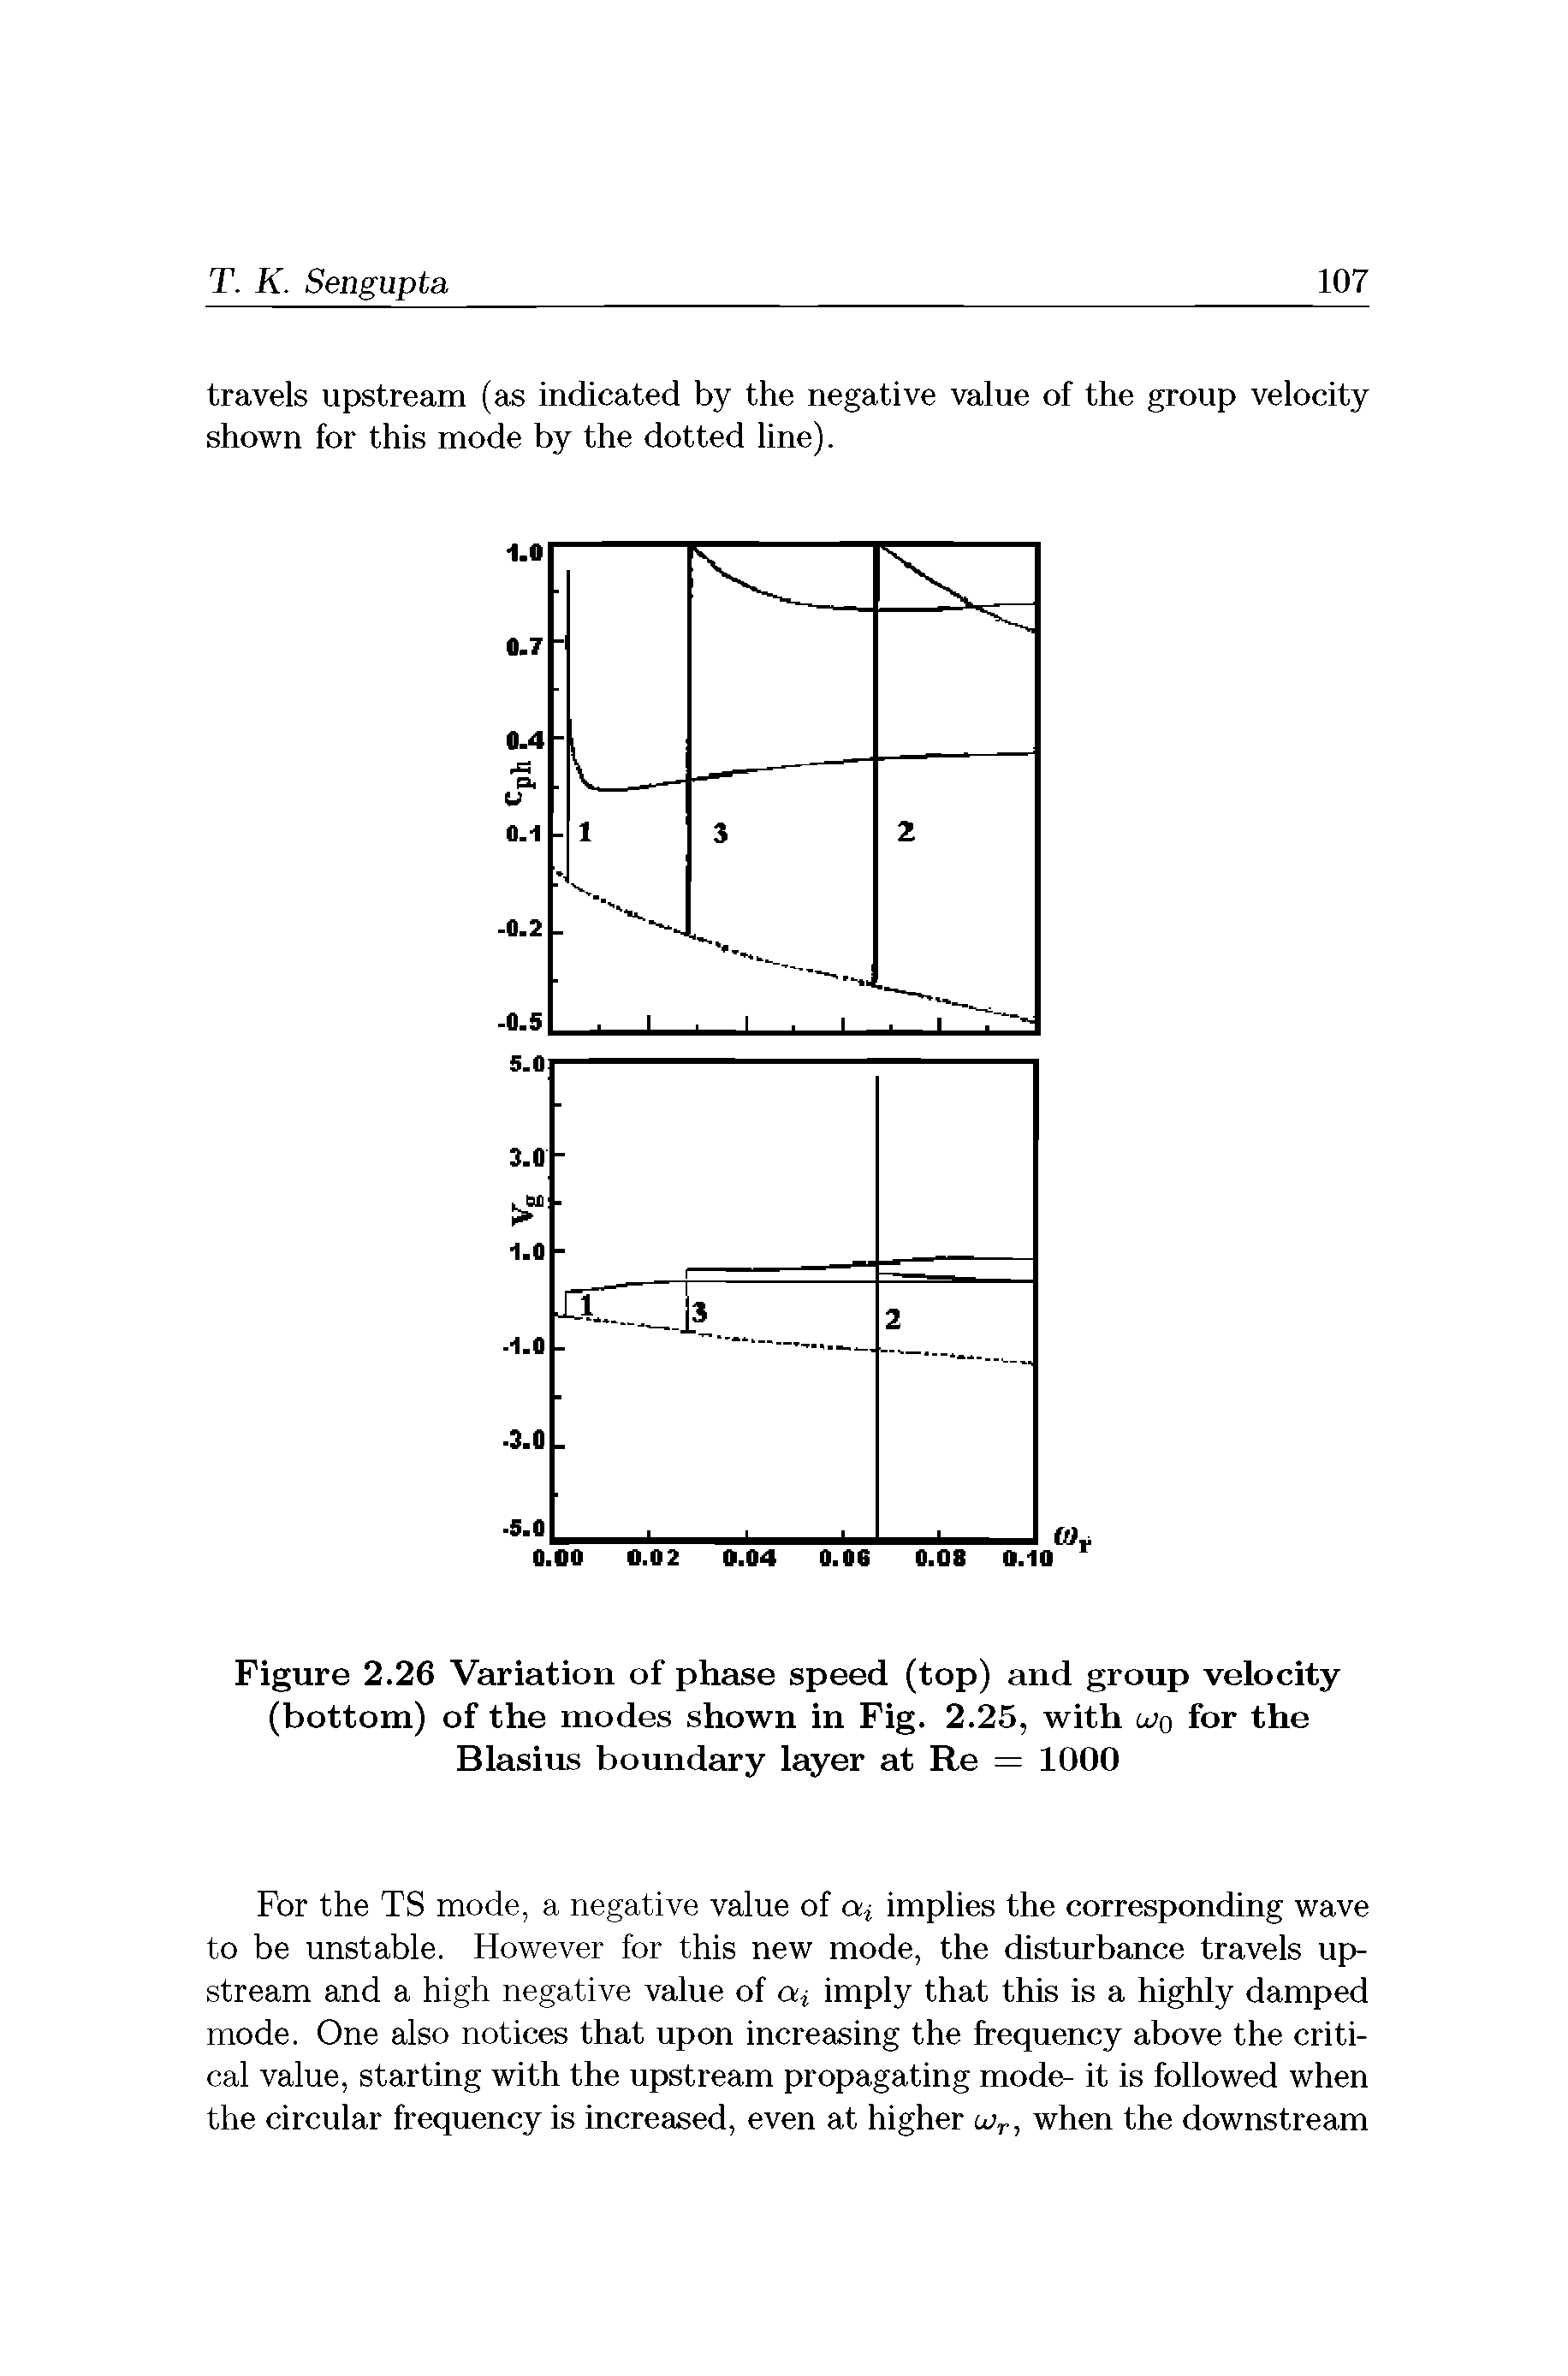 Figure 2.26 Variation of phase speed (top) and group velocity (bottom) of the modes shown in Fig. 2.25, with wq for the Blasius boundary layer at Re = 1000...